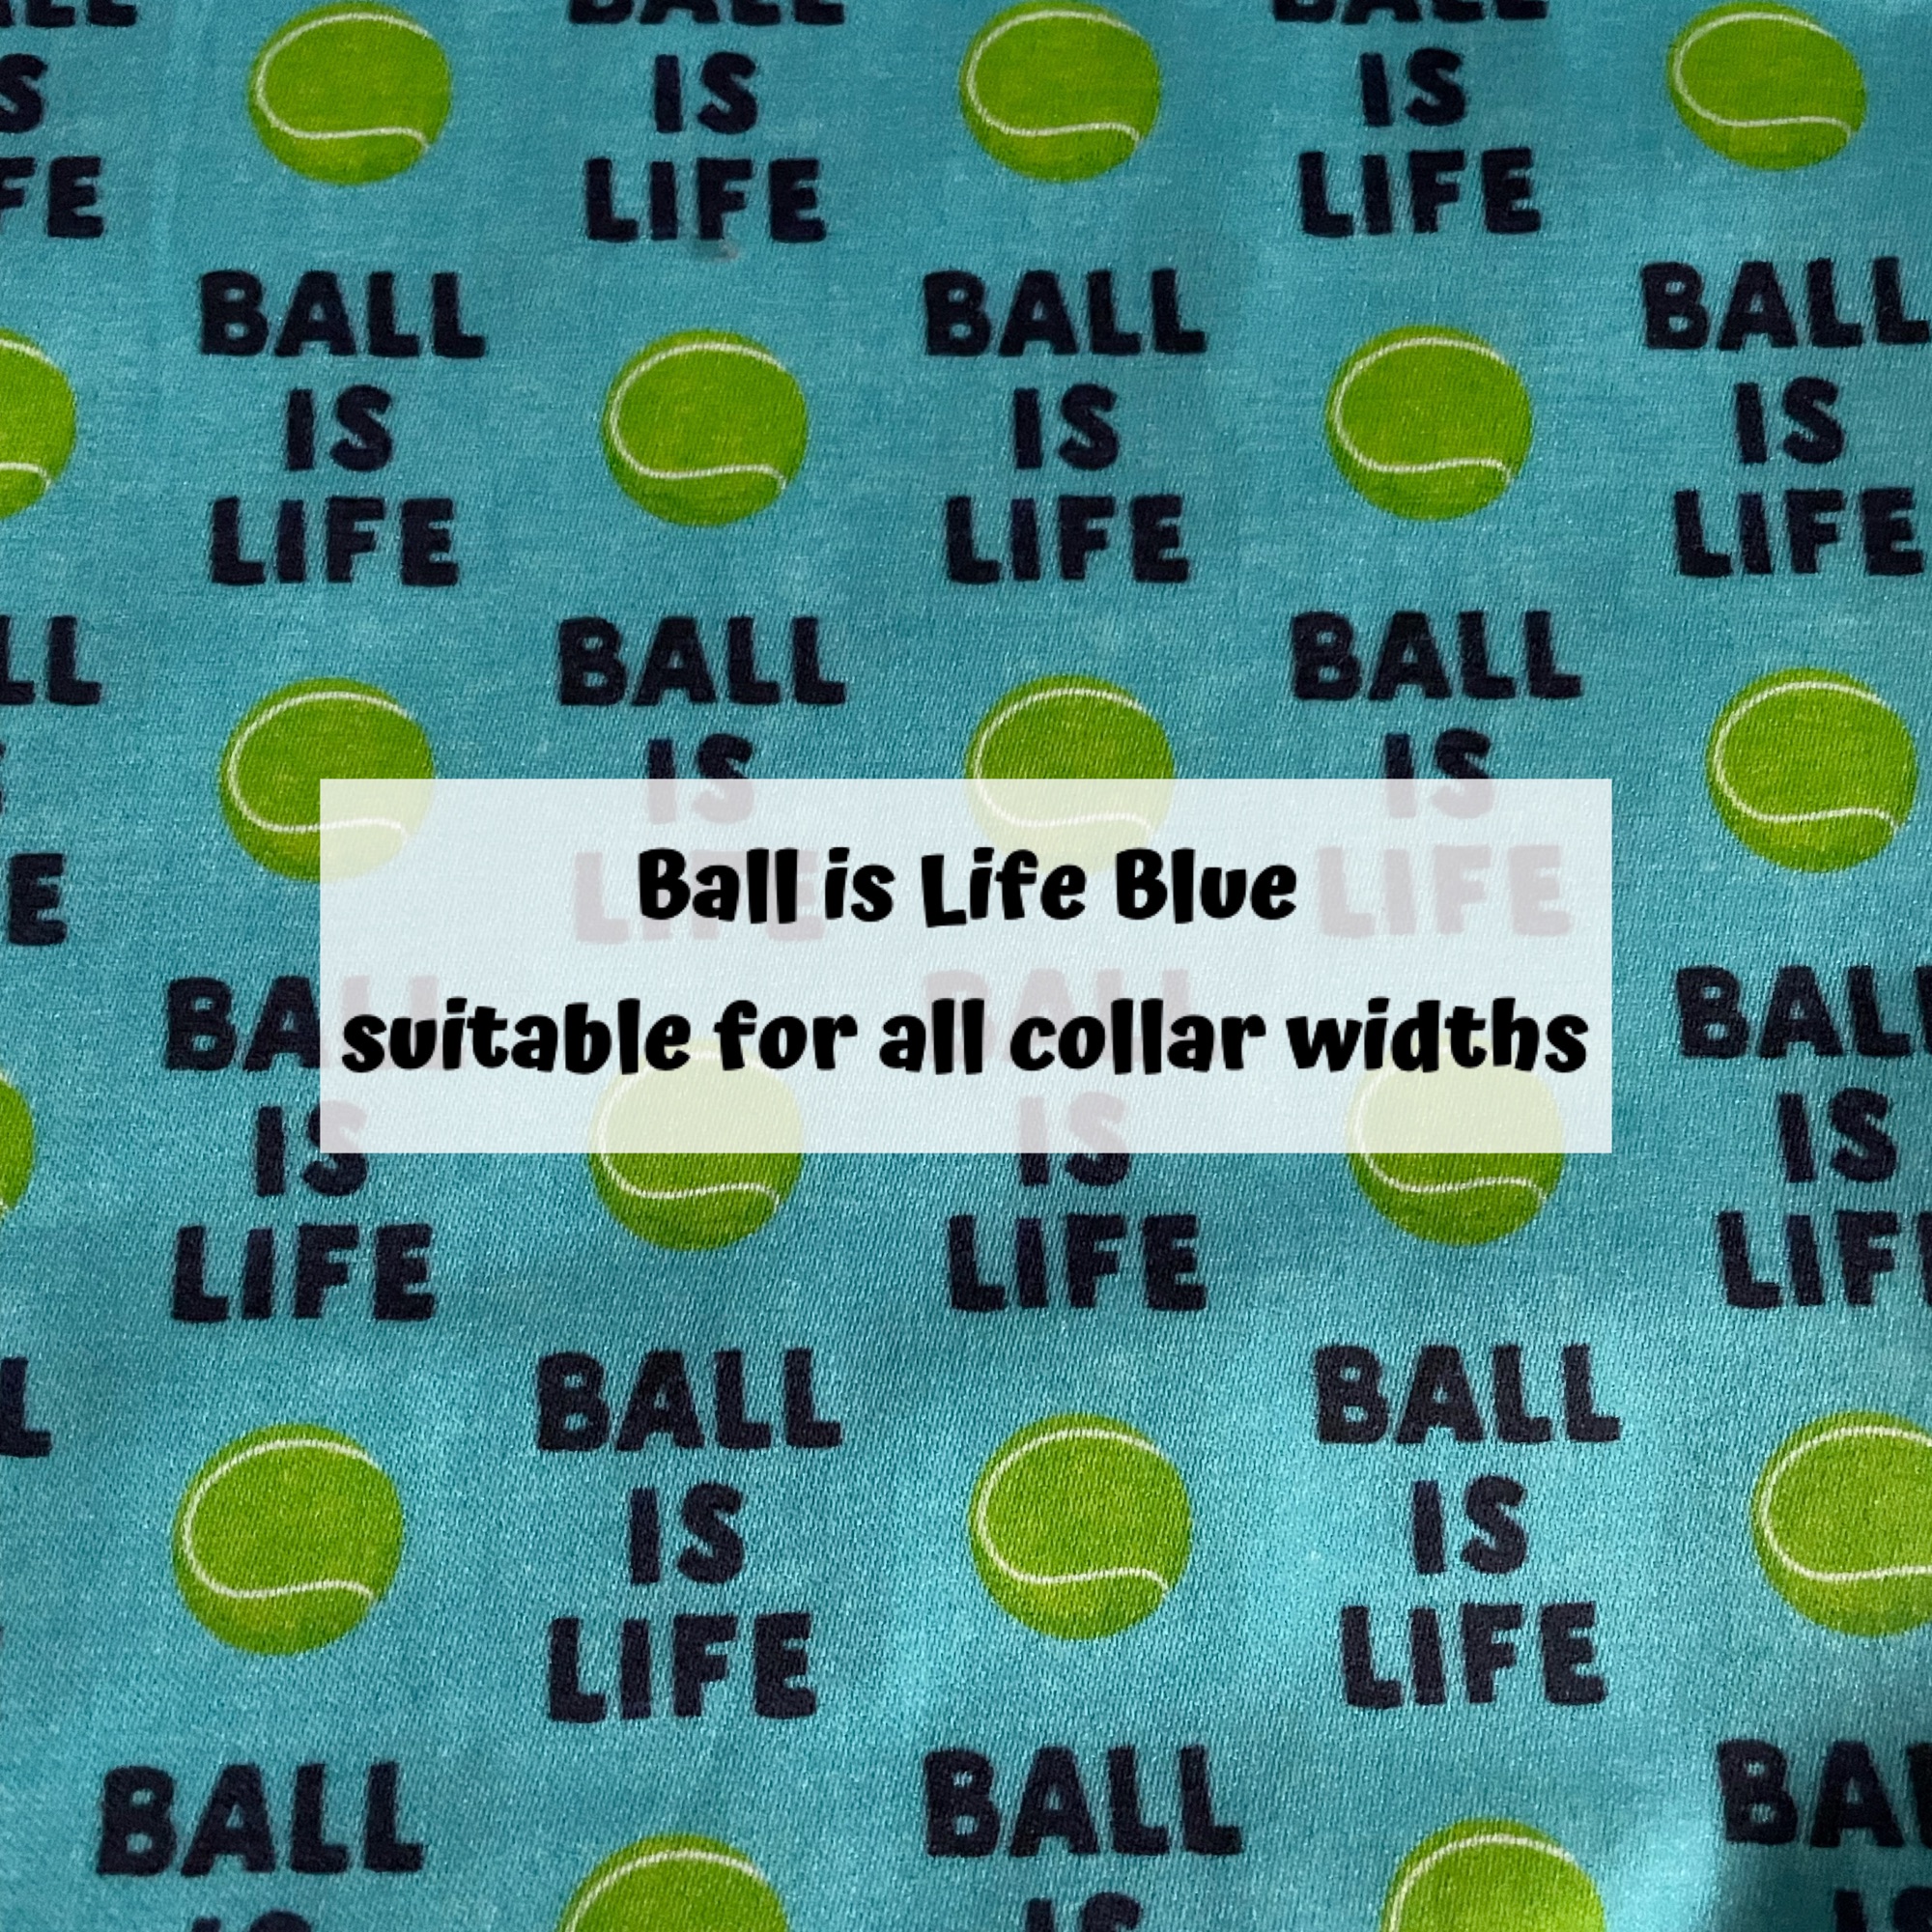 Ball is life blue